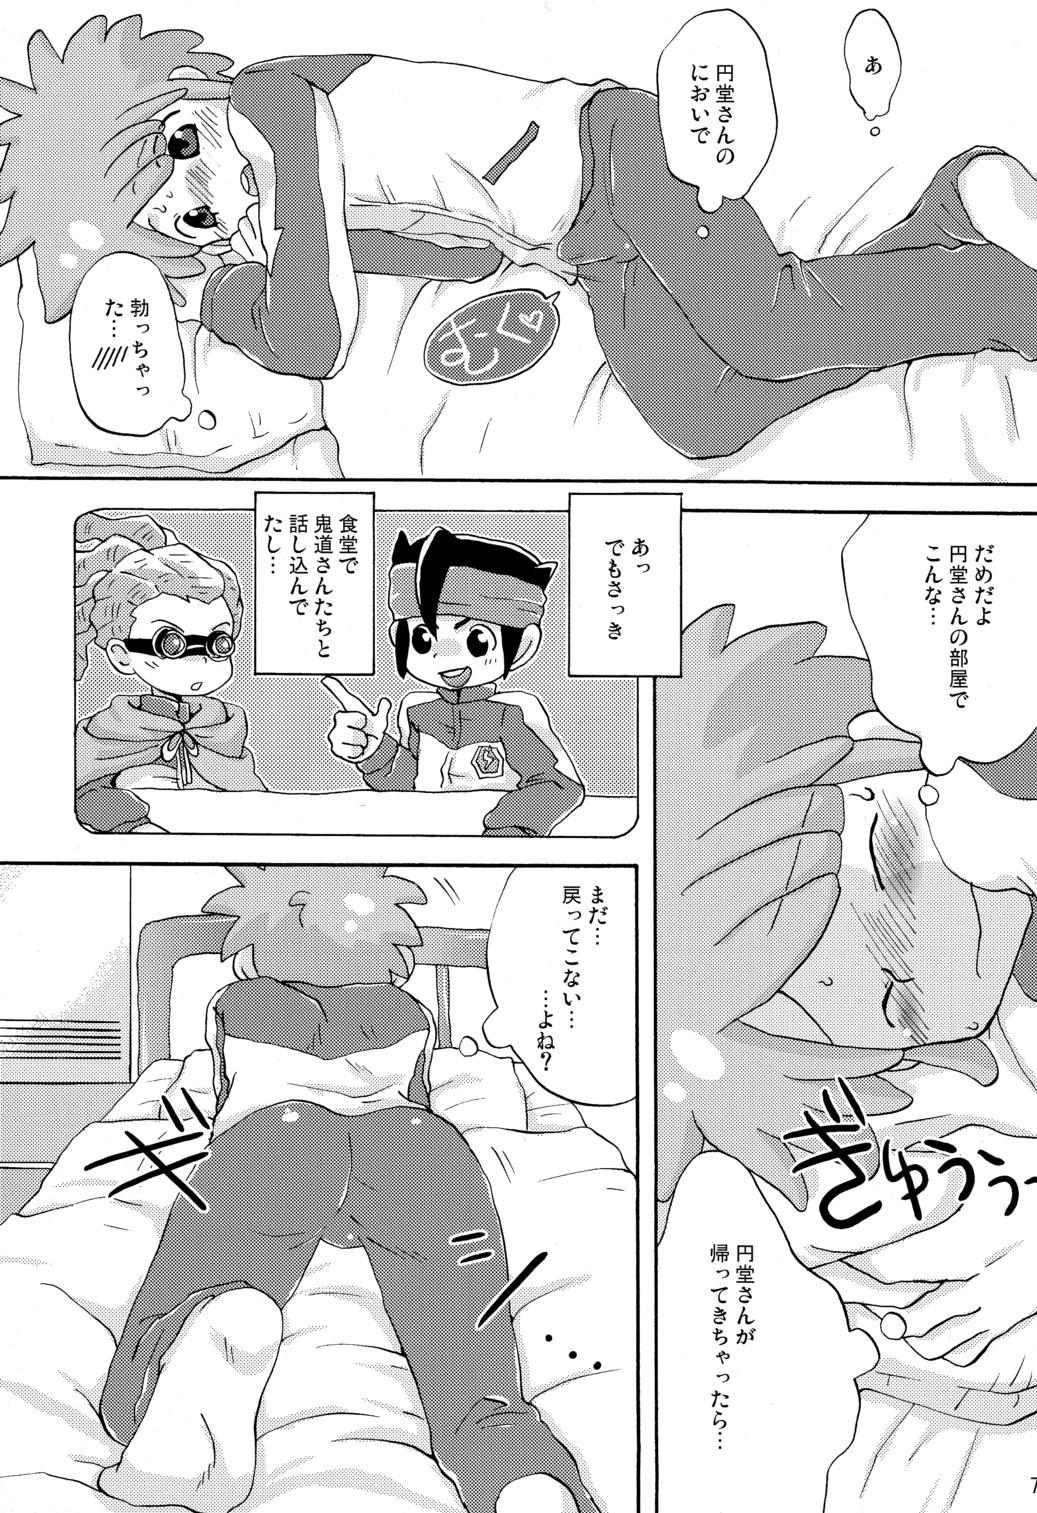 Spit SWEET ROOM - Inazuma eleven Oral Porn - Page 7